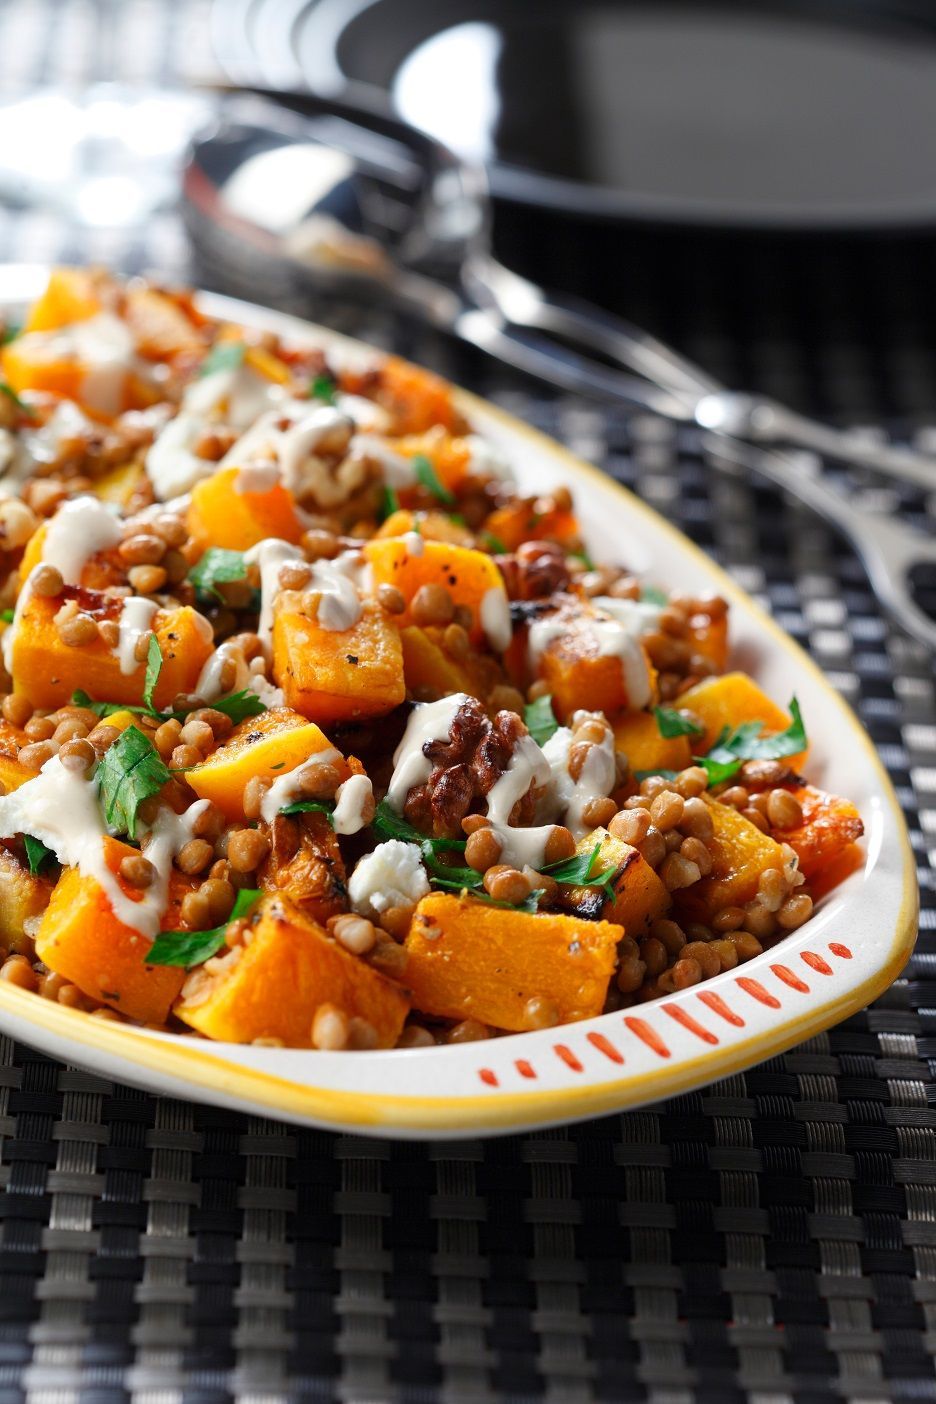 Roasted Butternut & Lentil Salad with Goat Cheese